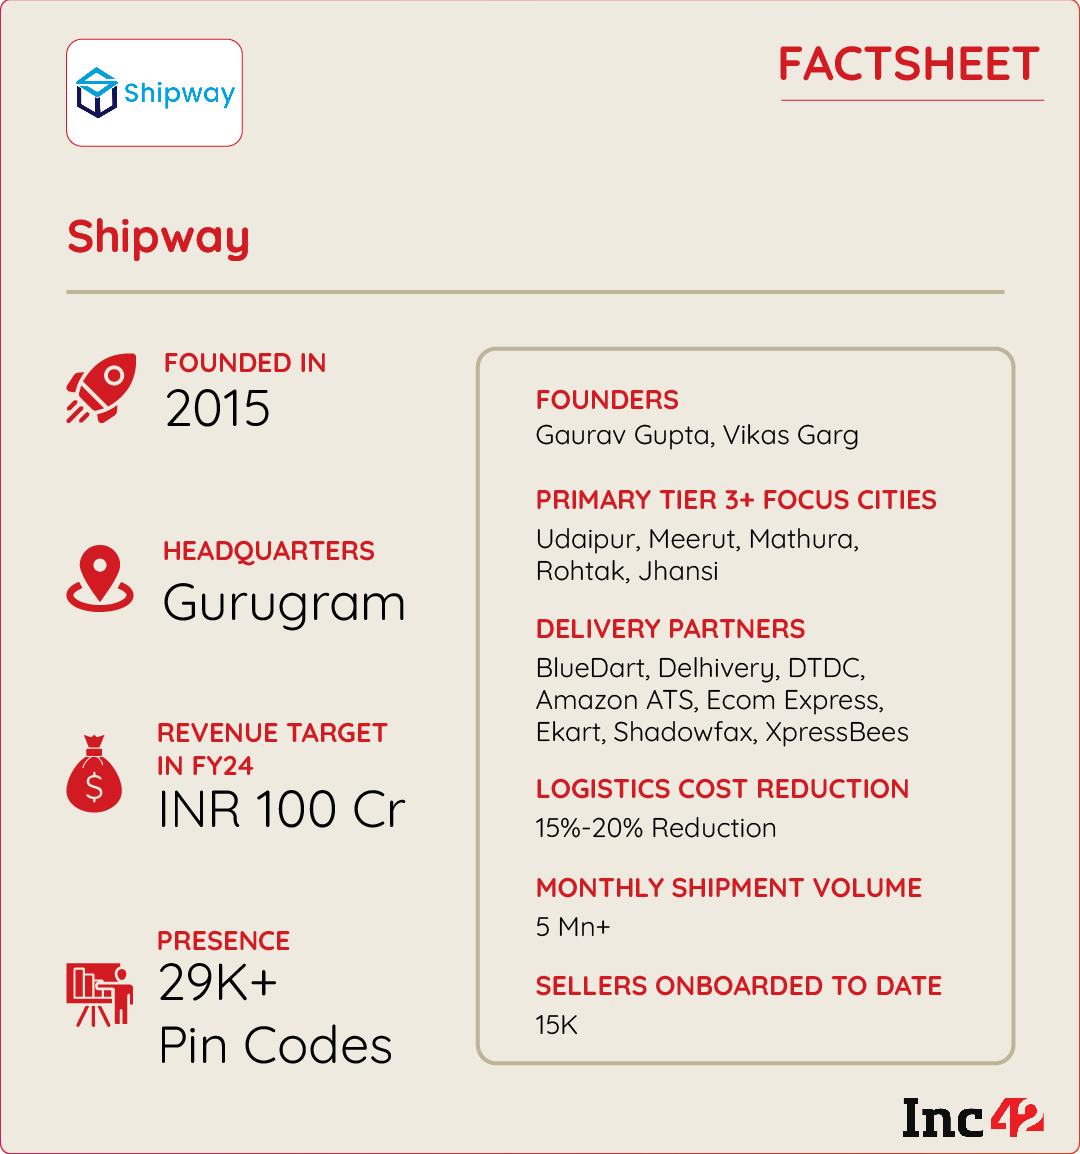 How Shipway Aims To Help Ecommerce Brands Capitalise On Festive Rush In India's Tier 3+ Markets